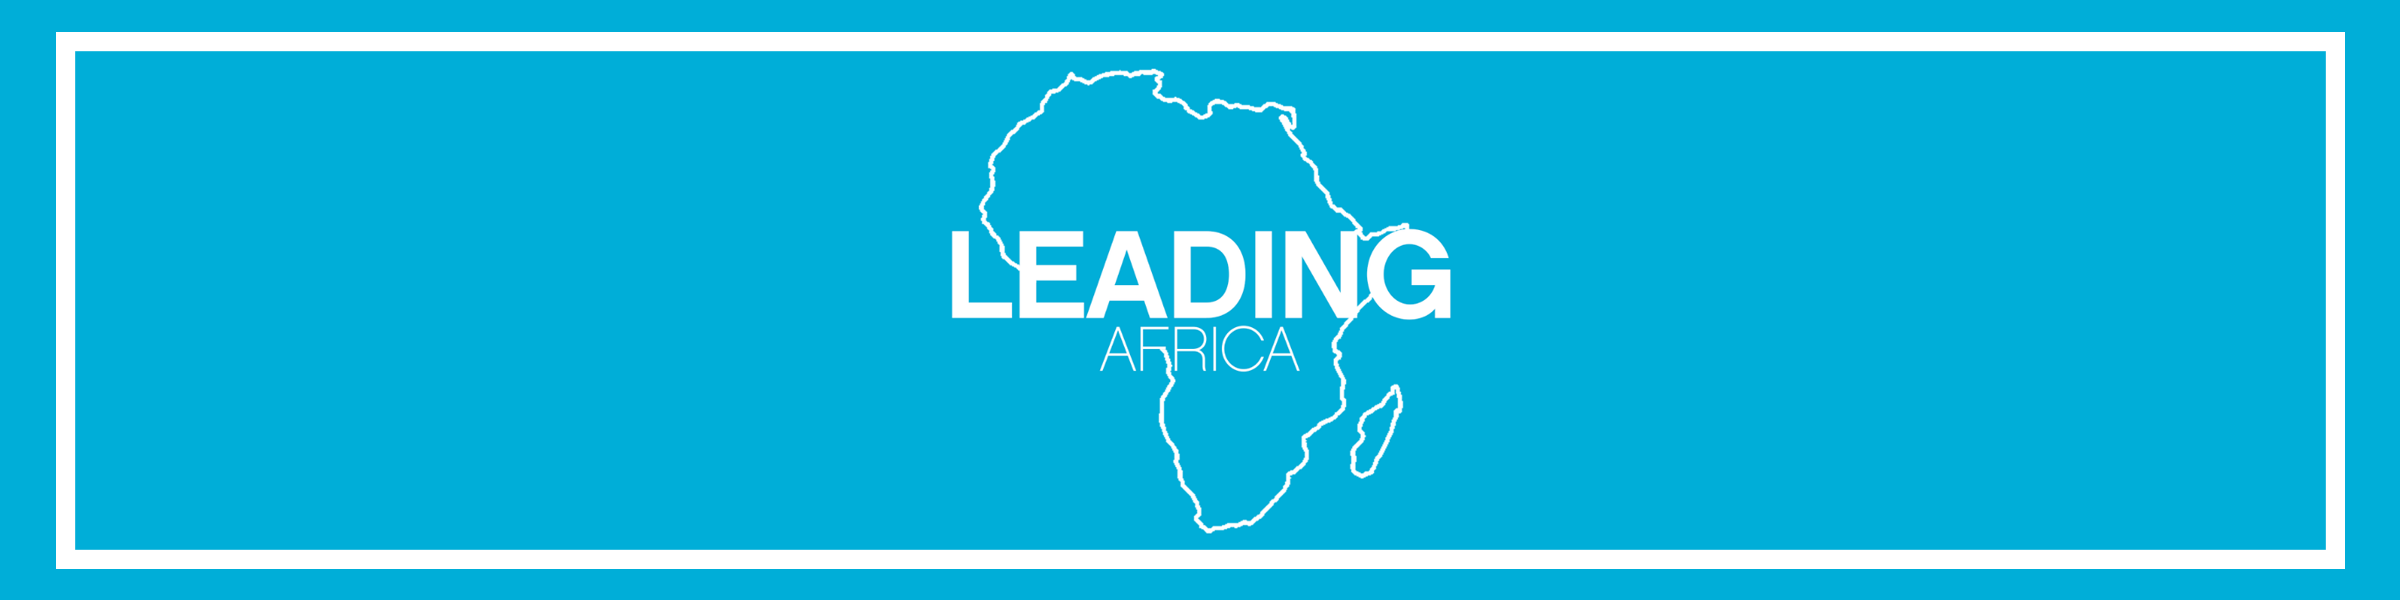 Banner of Leading Africa Scholarship 